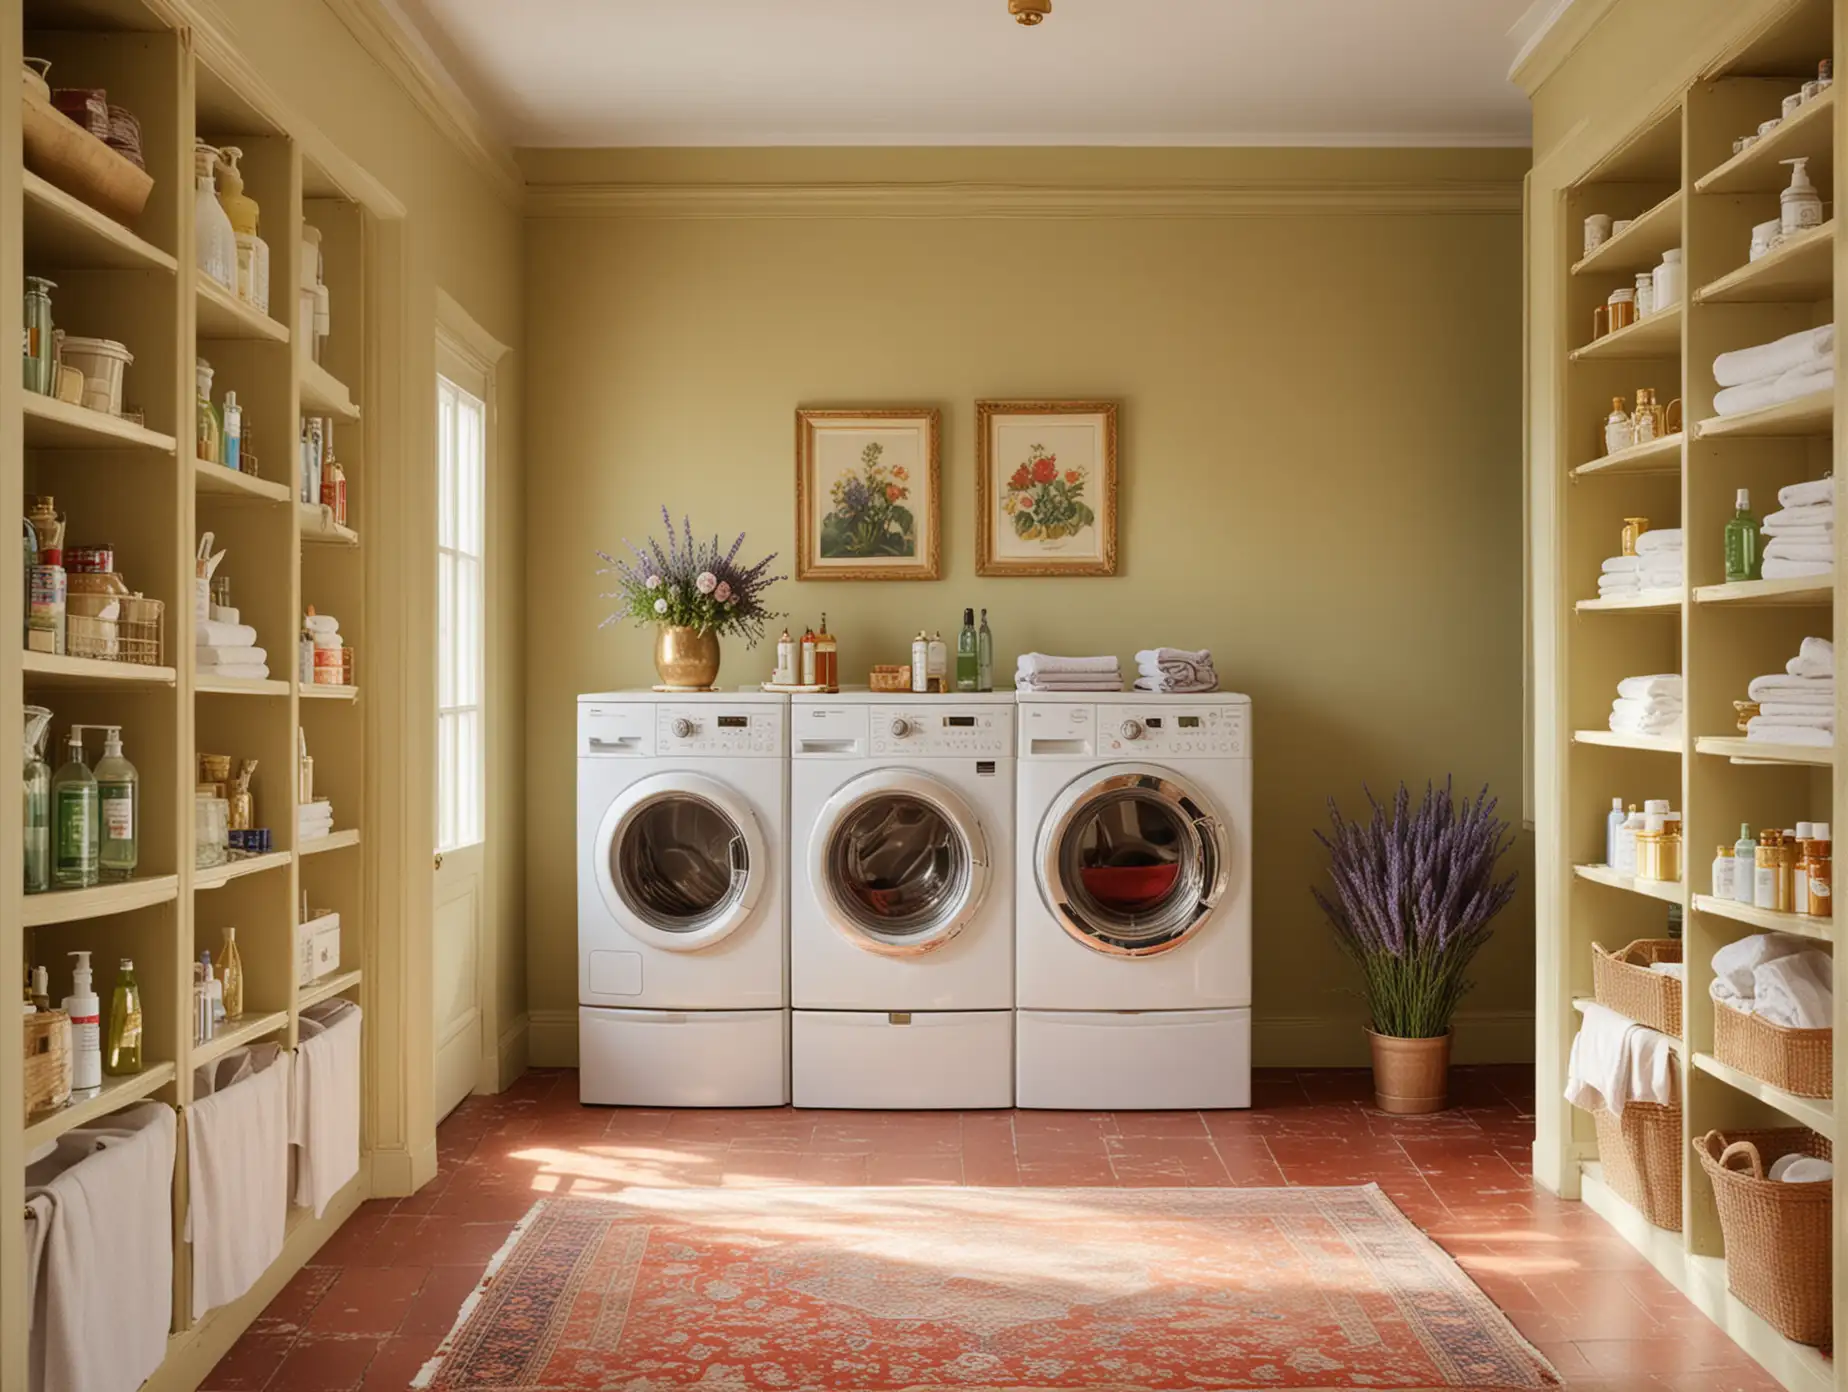 laundry room with with washr and dryer Imagine a scene bathed in soft golden light, with red oxide floor and lime gbreen walls, a plush rug underfoot, and  In the center, a lavish bouquet of lavender stands tall in an exquisite vase, framed by shelves displaying gleaming gold containers of high-end detergents and fabric softeners.